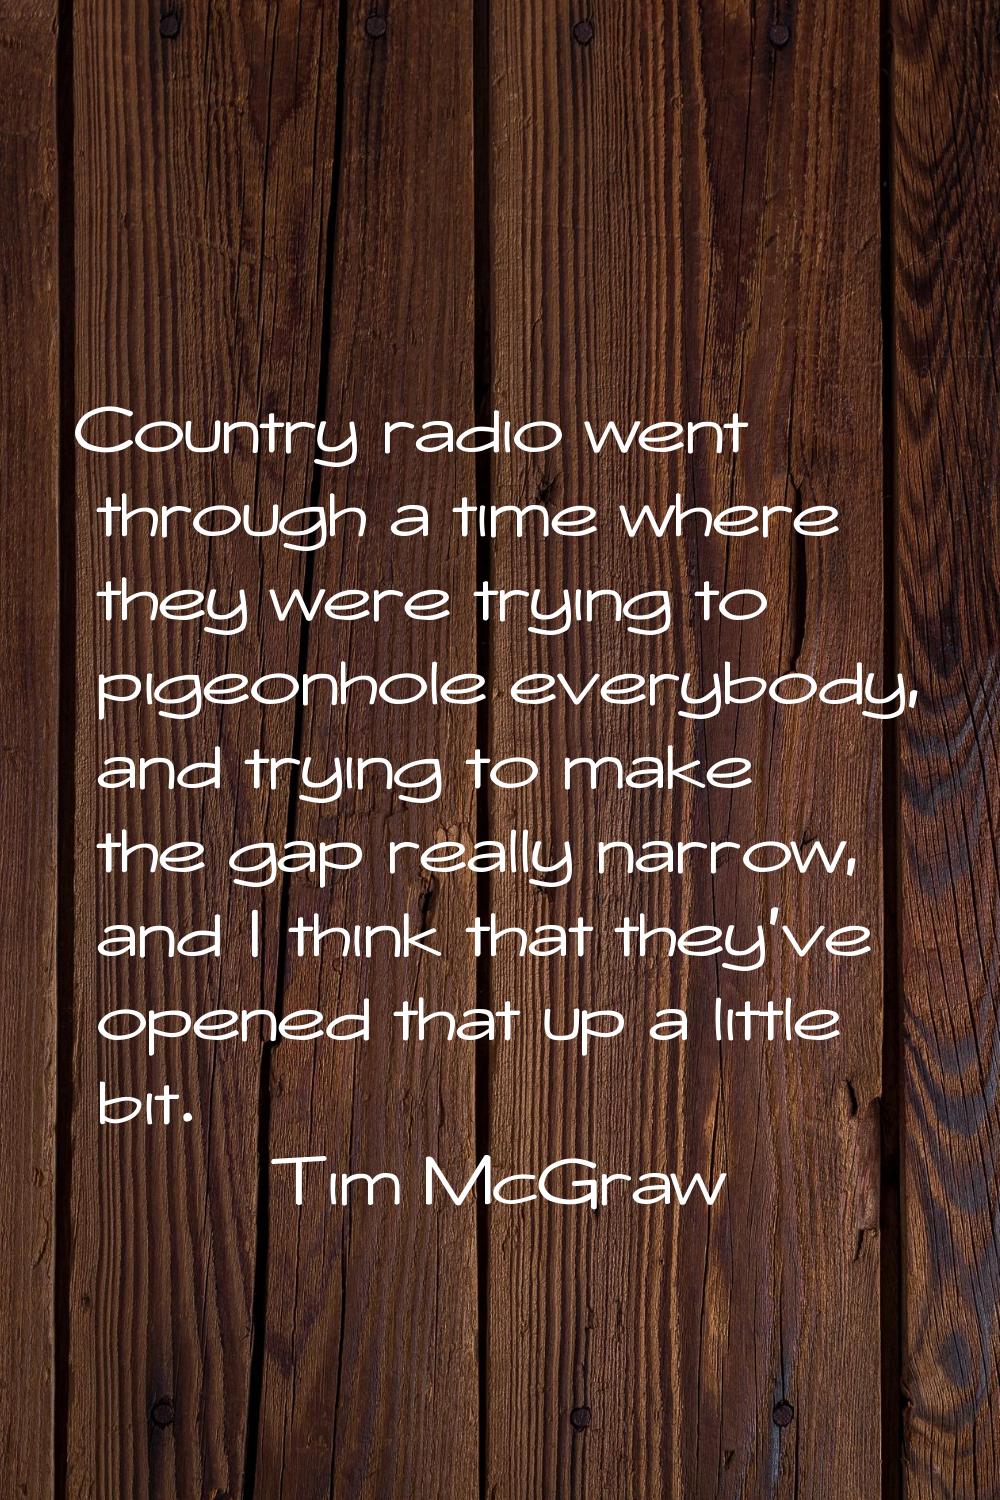 Country radio went through a time where they were trying to pigeonhole everybody, and trying to mak